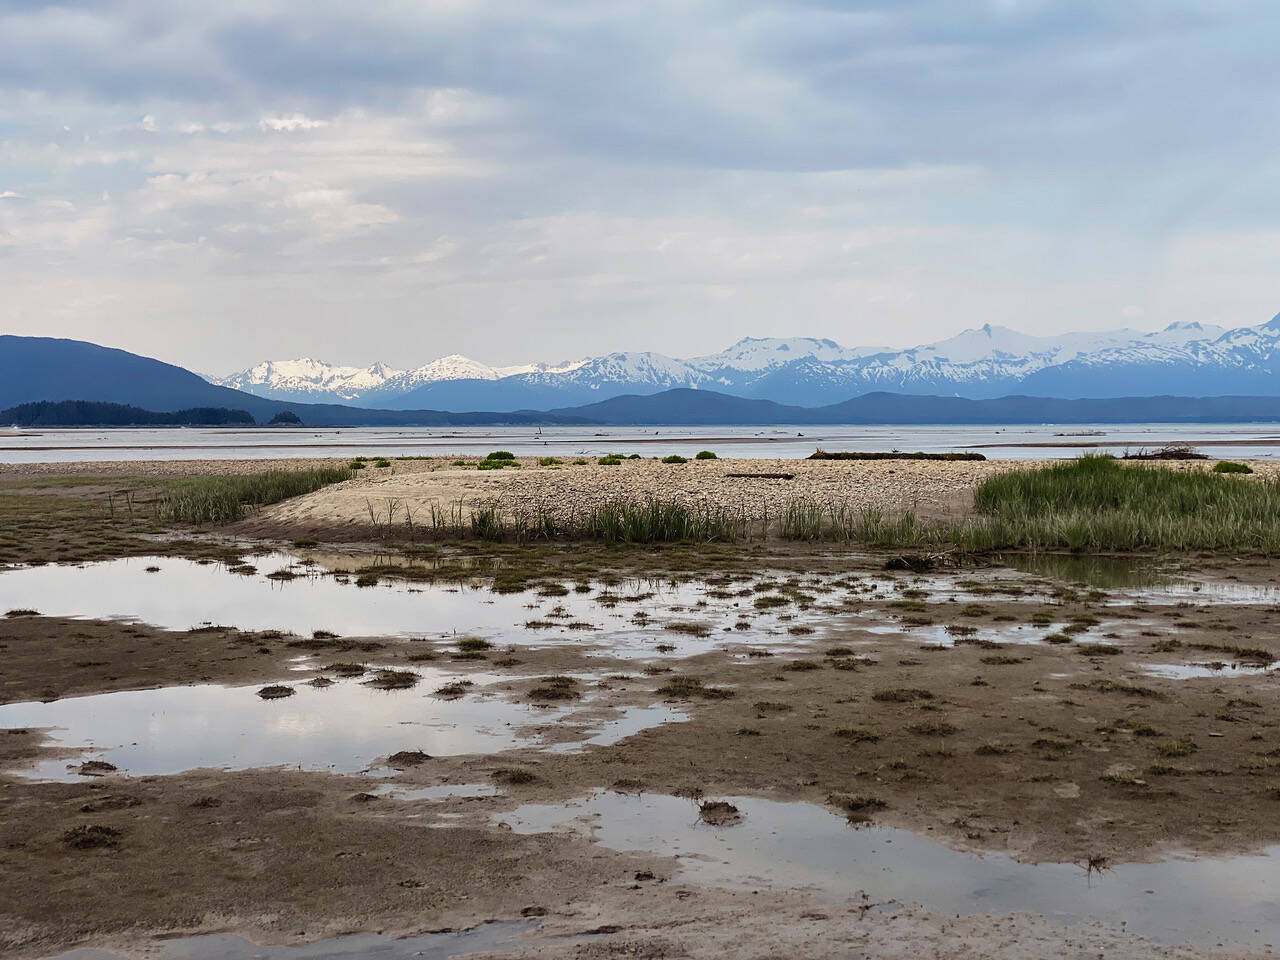 This photo shows the view from Eagle Beach while the tide is out. (Courtesy Photo / Kenneth Gill, gillfoto)